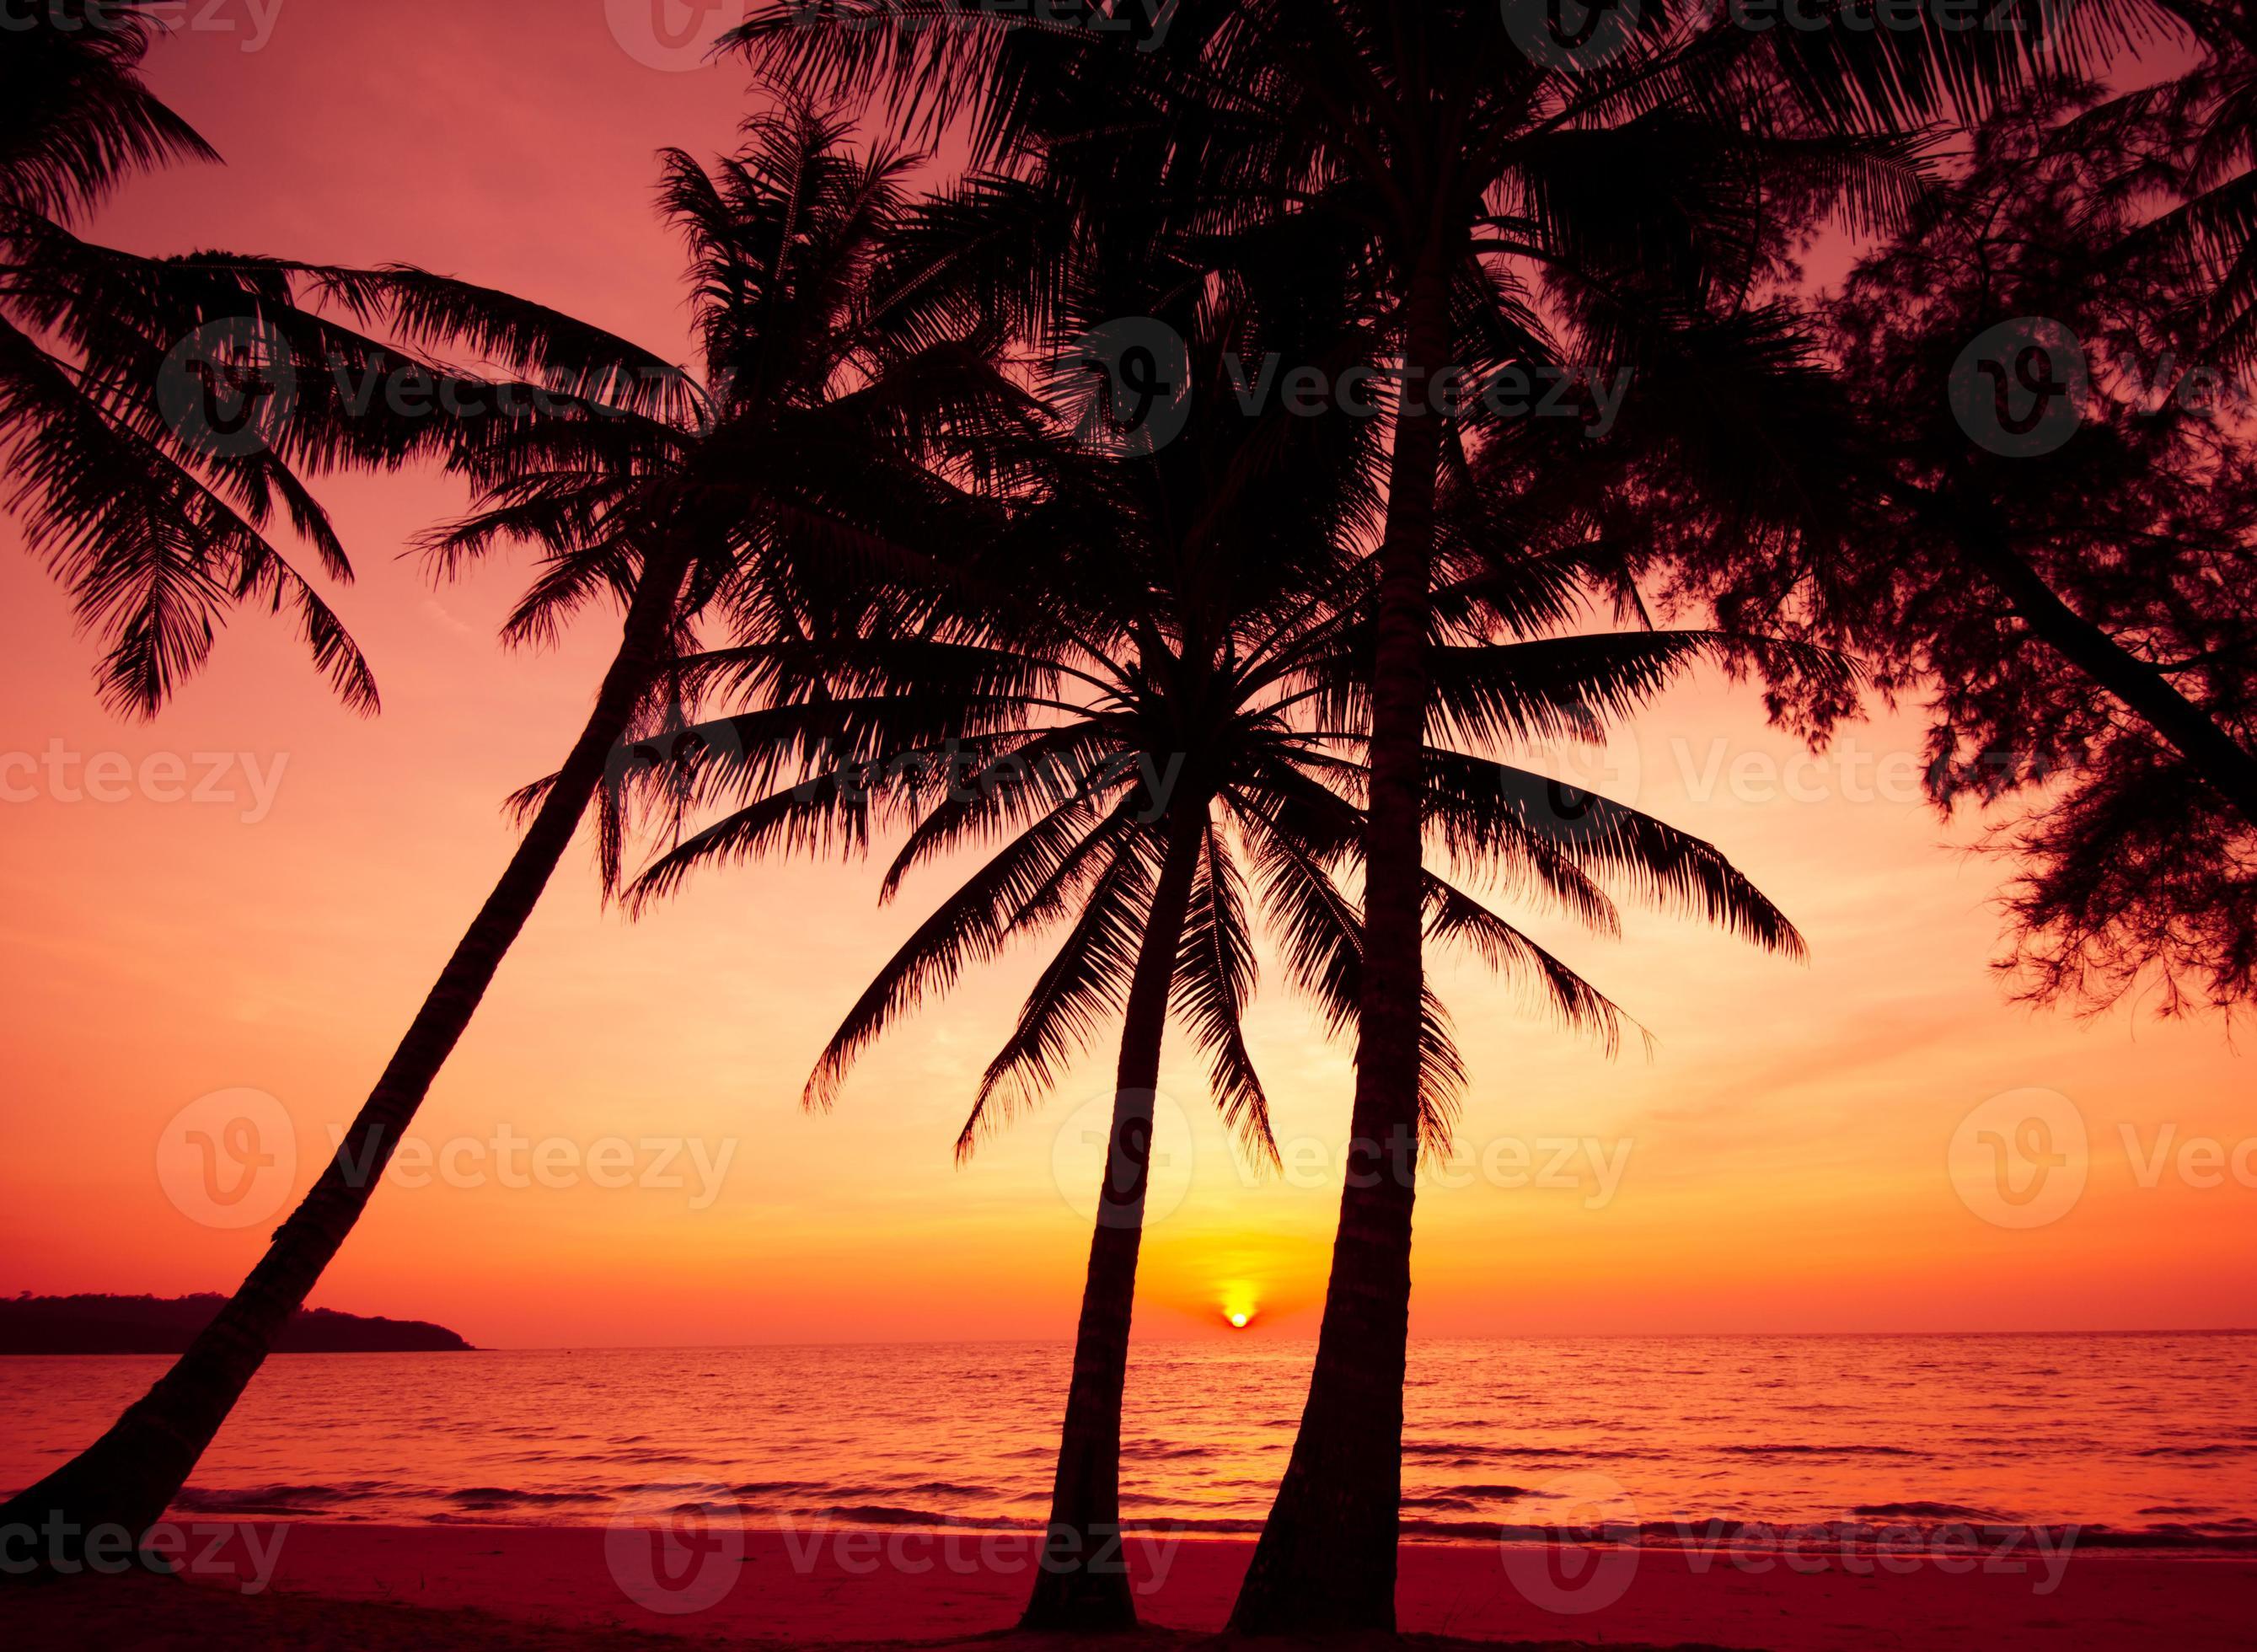 Palm Trees Silhouette On Sunset Tropical Beach 1355669 Stock Photo At Vecteezy